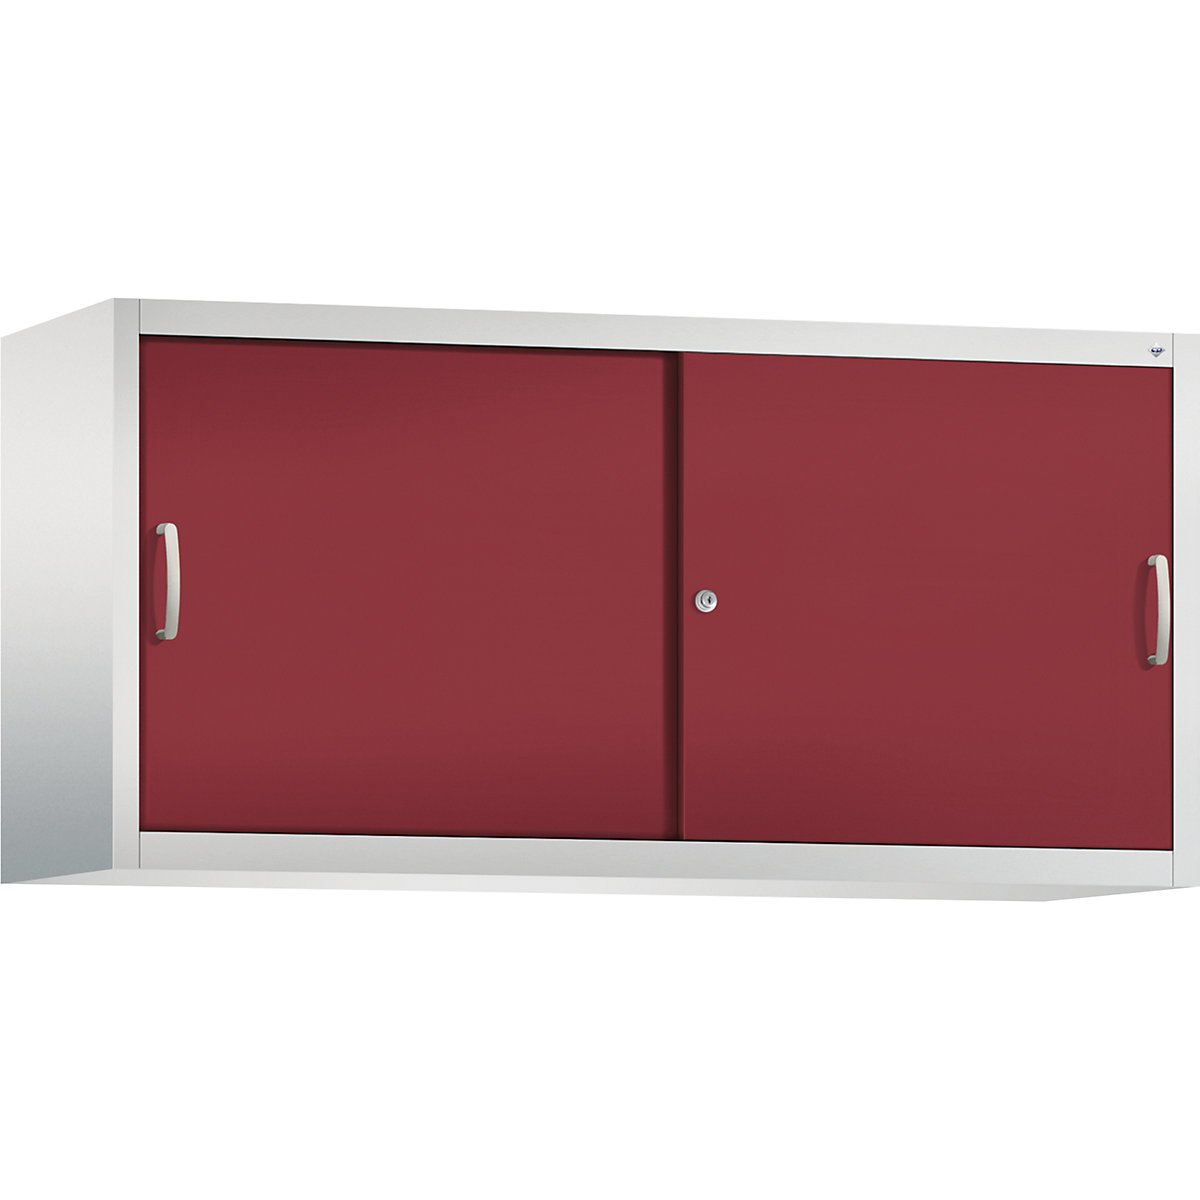 ACURADO add-on cupboard with sliding doors – C+P, 2 shelves, HxWxD 790 x 1600 x 500 mm, light grey / ruby red-9